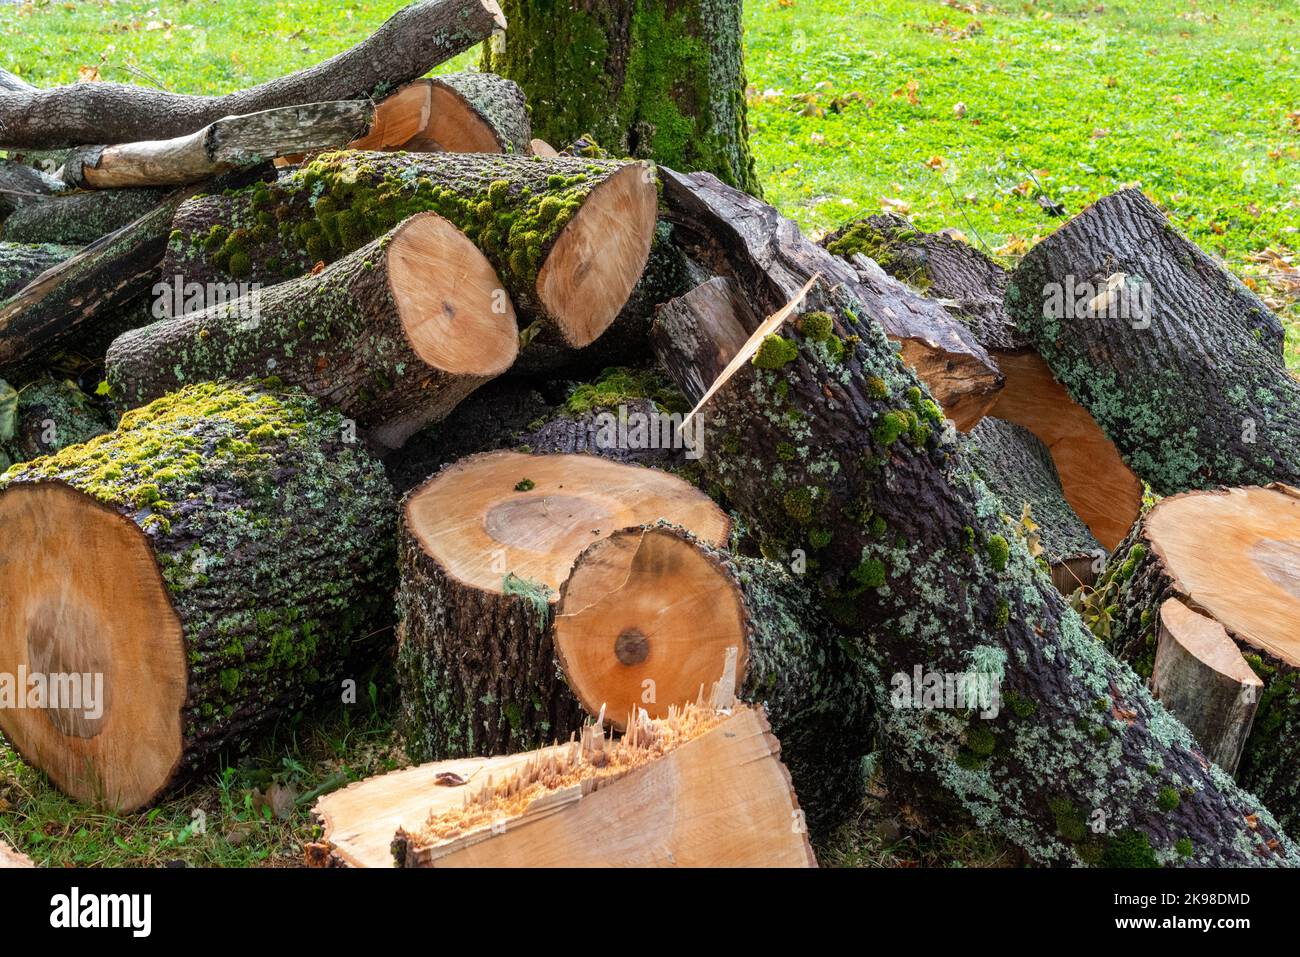 Sprucewood, firewood, is cut with a chainsaw, into firewood junks and stacked for burning as home heating. The pile lays on lush and green grass. Stock Photo